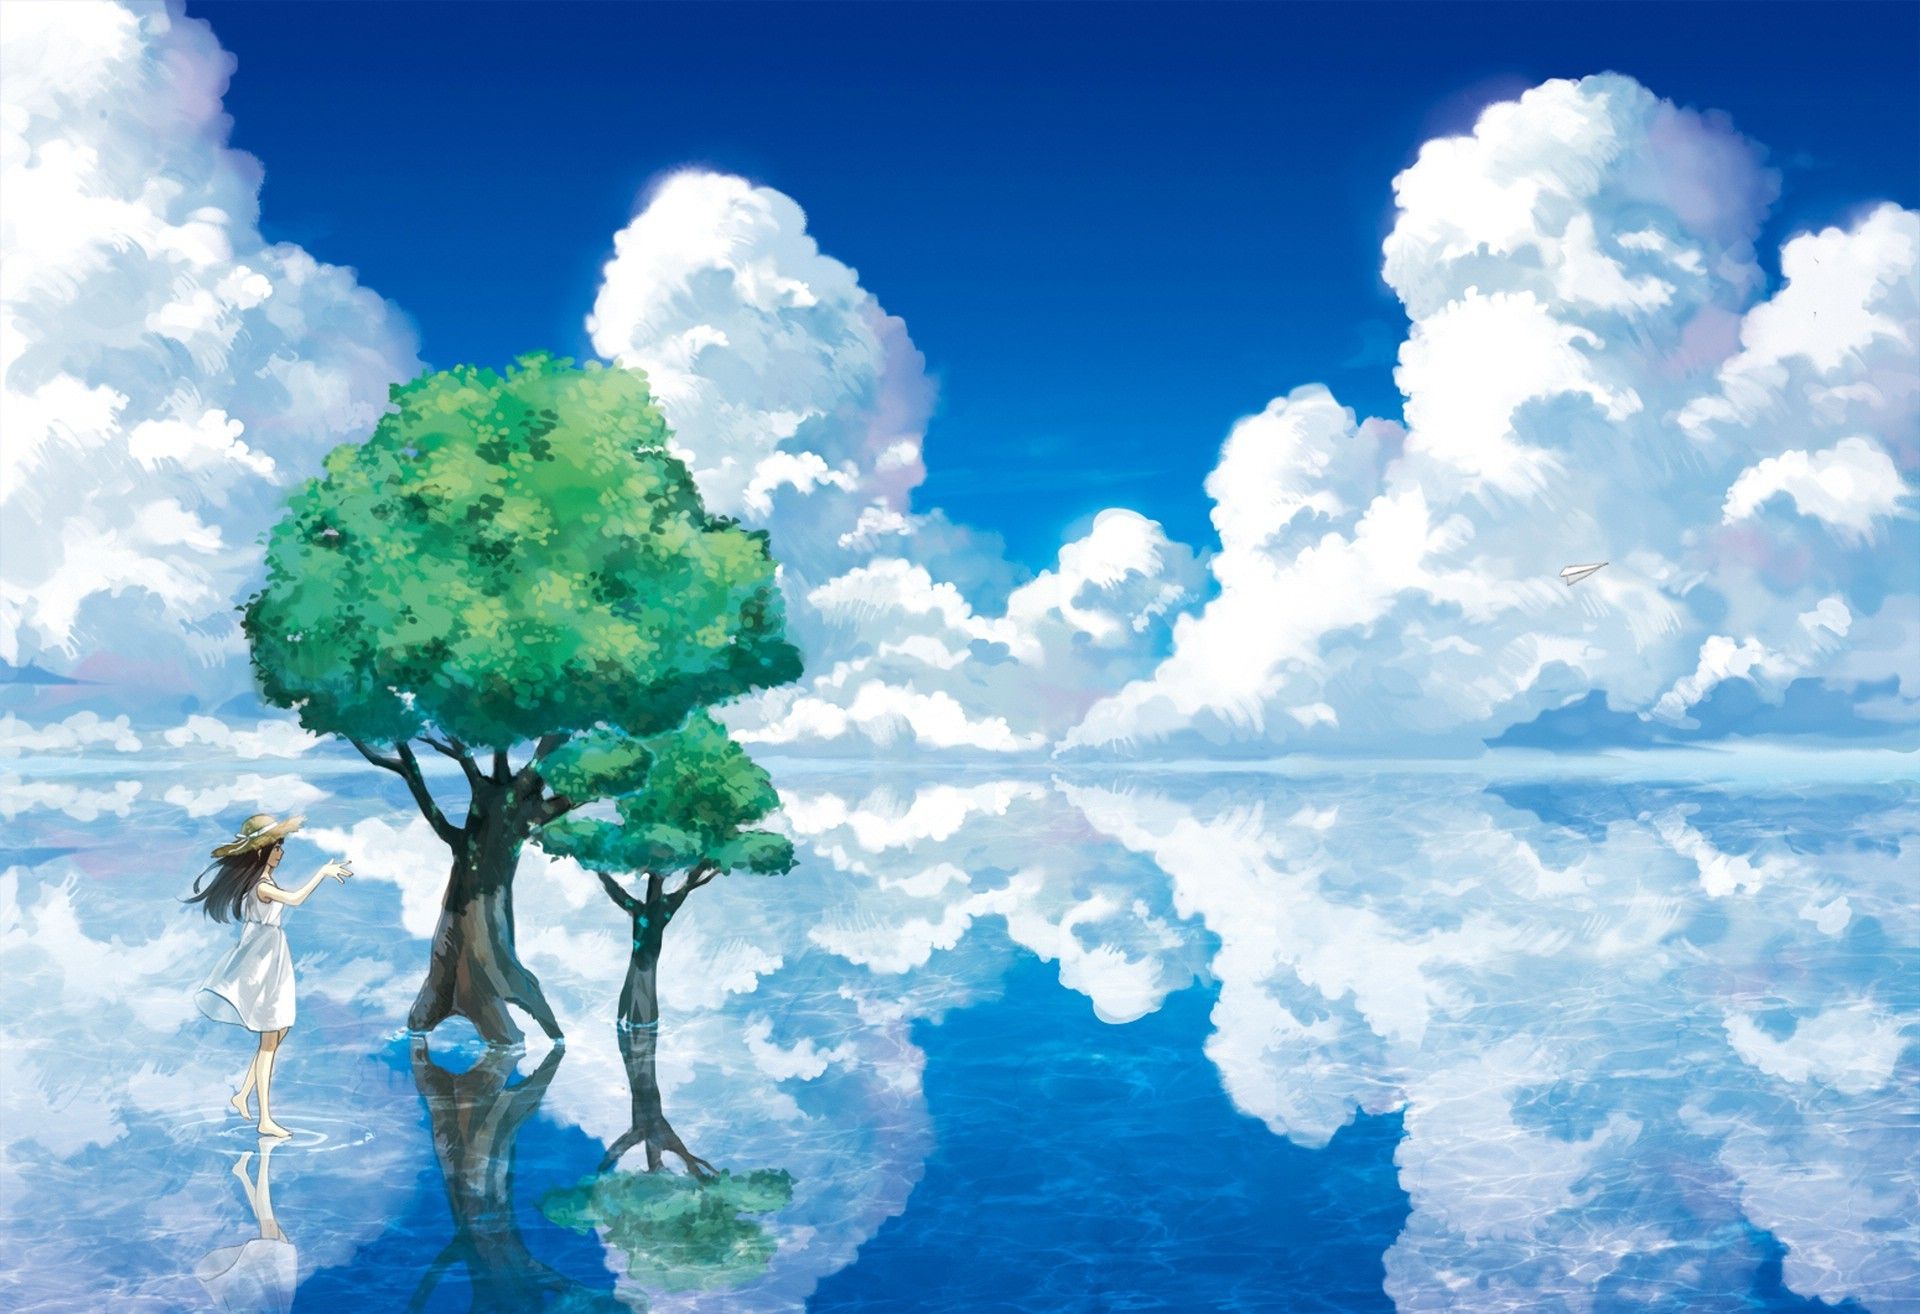 Wallpaper, sunlight, trees, sea, anime girls, reflection, sky, clouds, blue, original characters, atmosphere, cloud, tree, flower, computer wallpaper, cumulus, 1920x1314 px 1920x1314